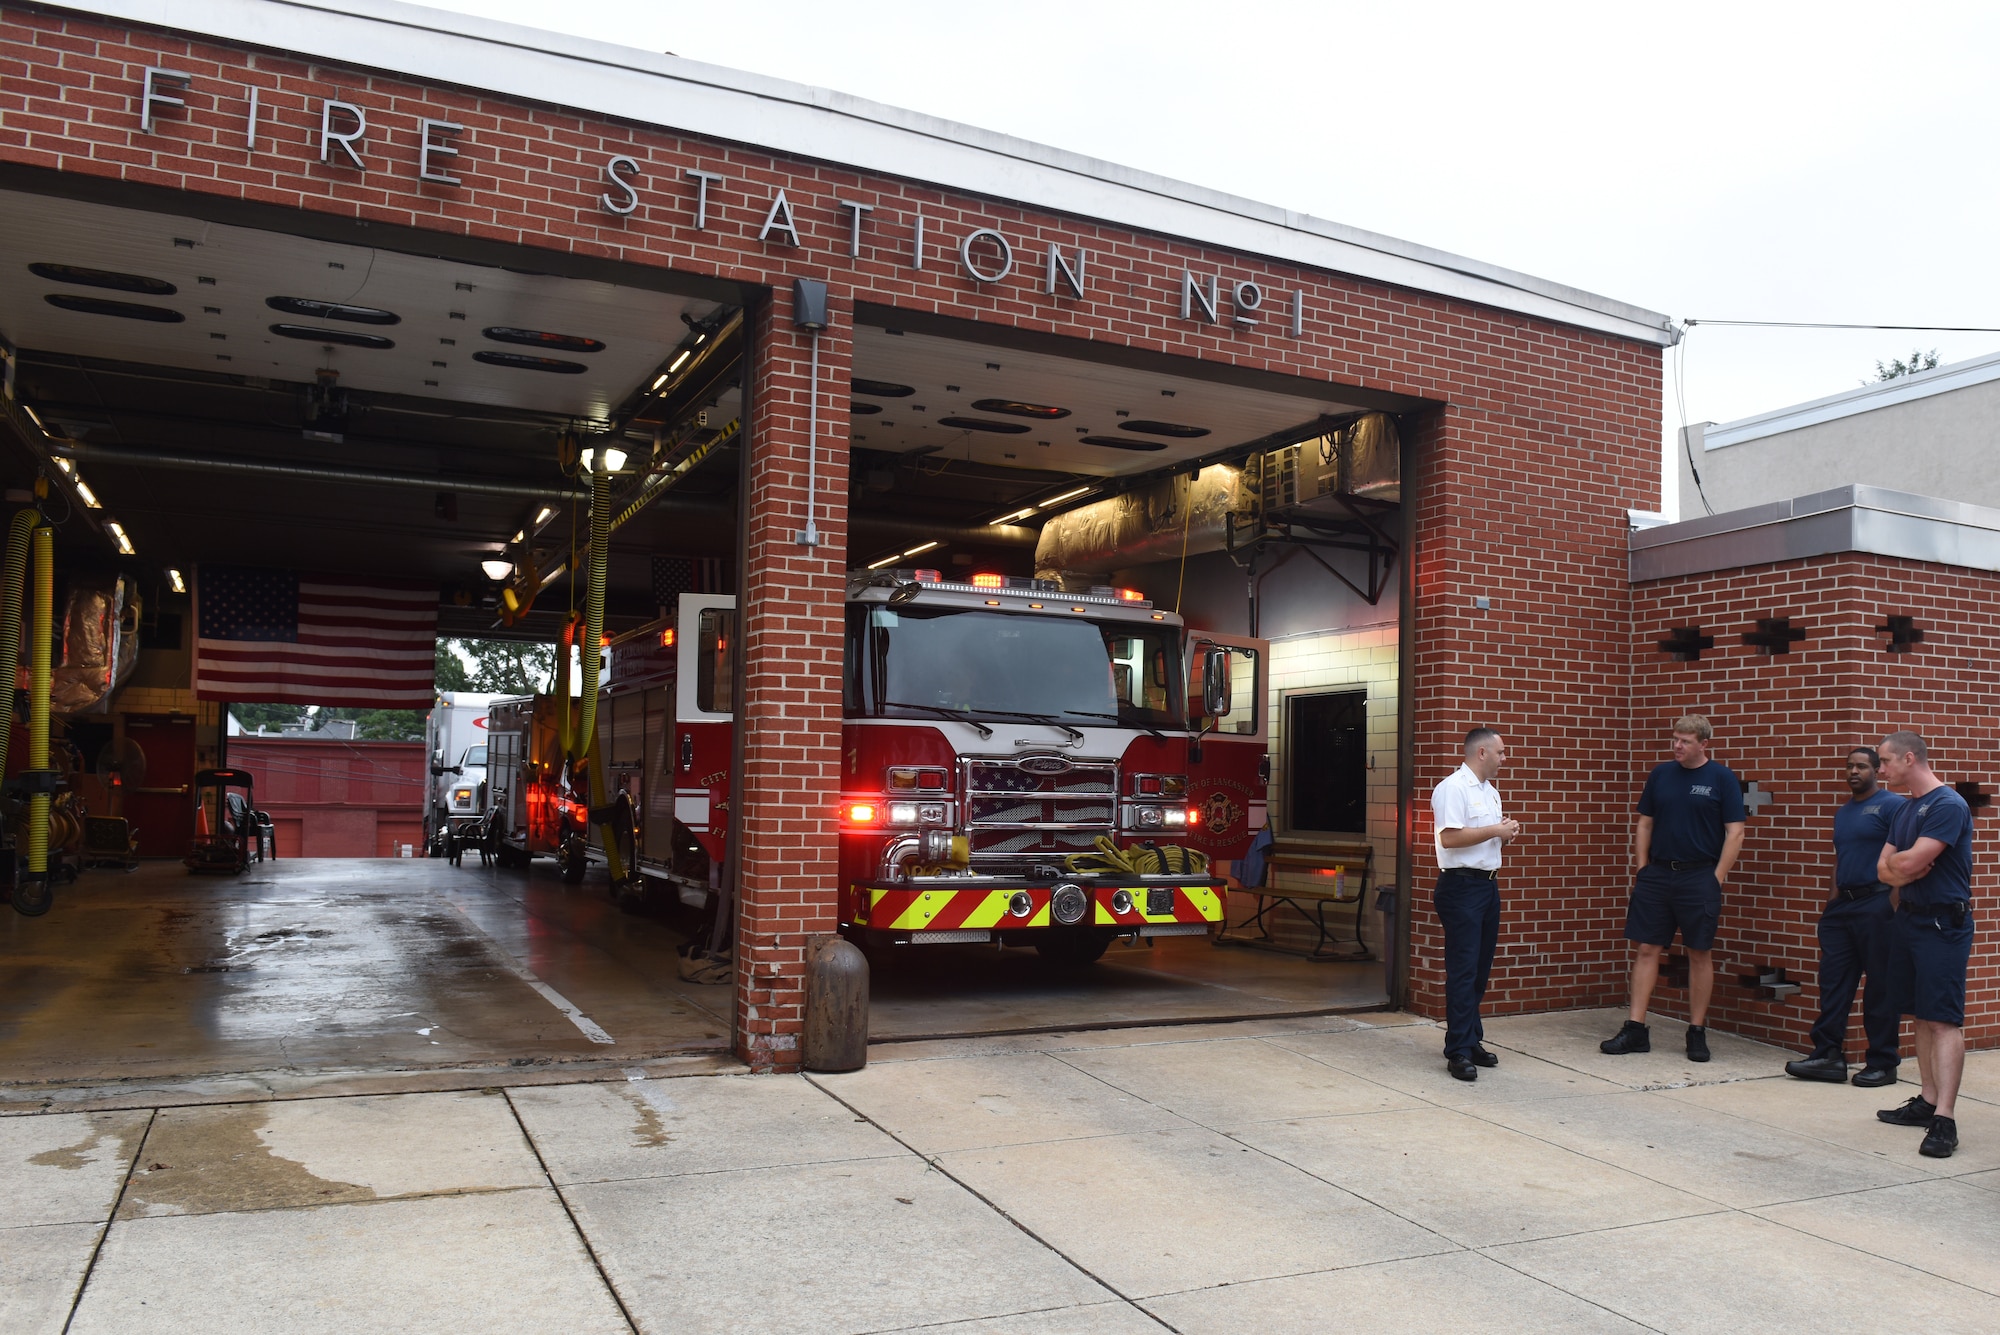 Scott Little, left, fire chief of Lancaster’s Bureau of Fire, talks with firefighters outside of station number one regarding maintenance being done to their firetruck Aug. 21, 2018, Lancaster, Pennsylvania. Little is the first fire chief hired from outside of the organization since Lancaster’s Bureau of Fire was organized as a career fire department in 1882. (U.S. Air National Guard photo by Senior Airman Julia Sorber/Released)